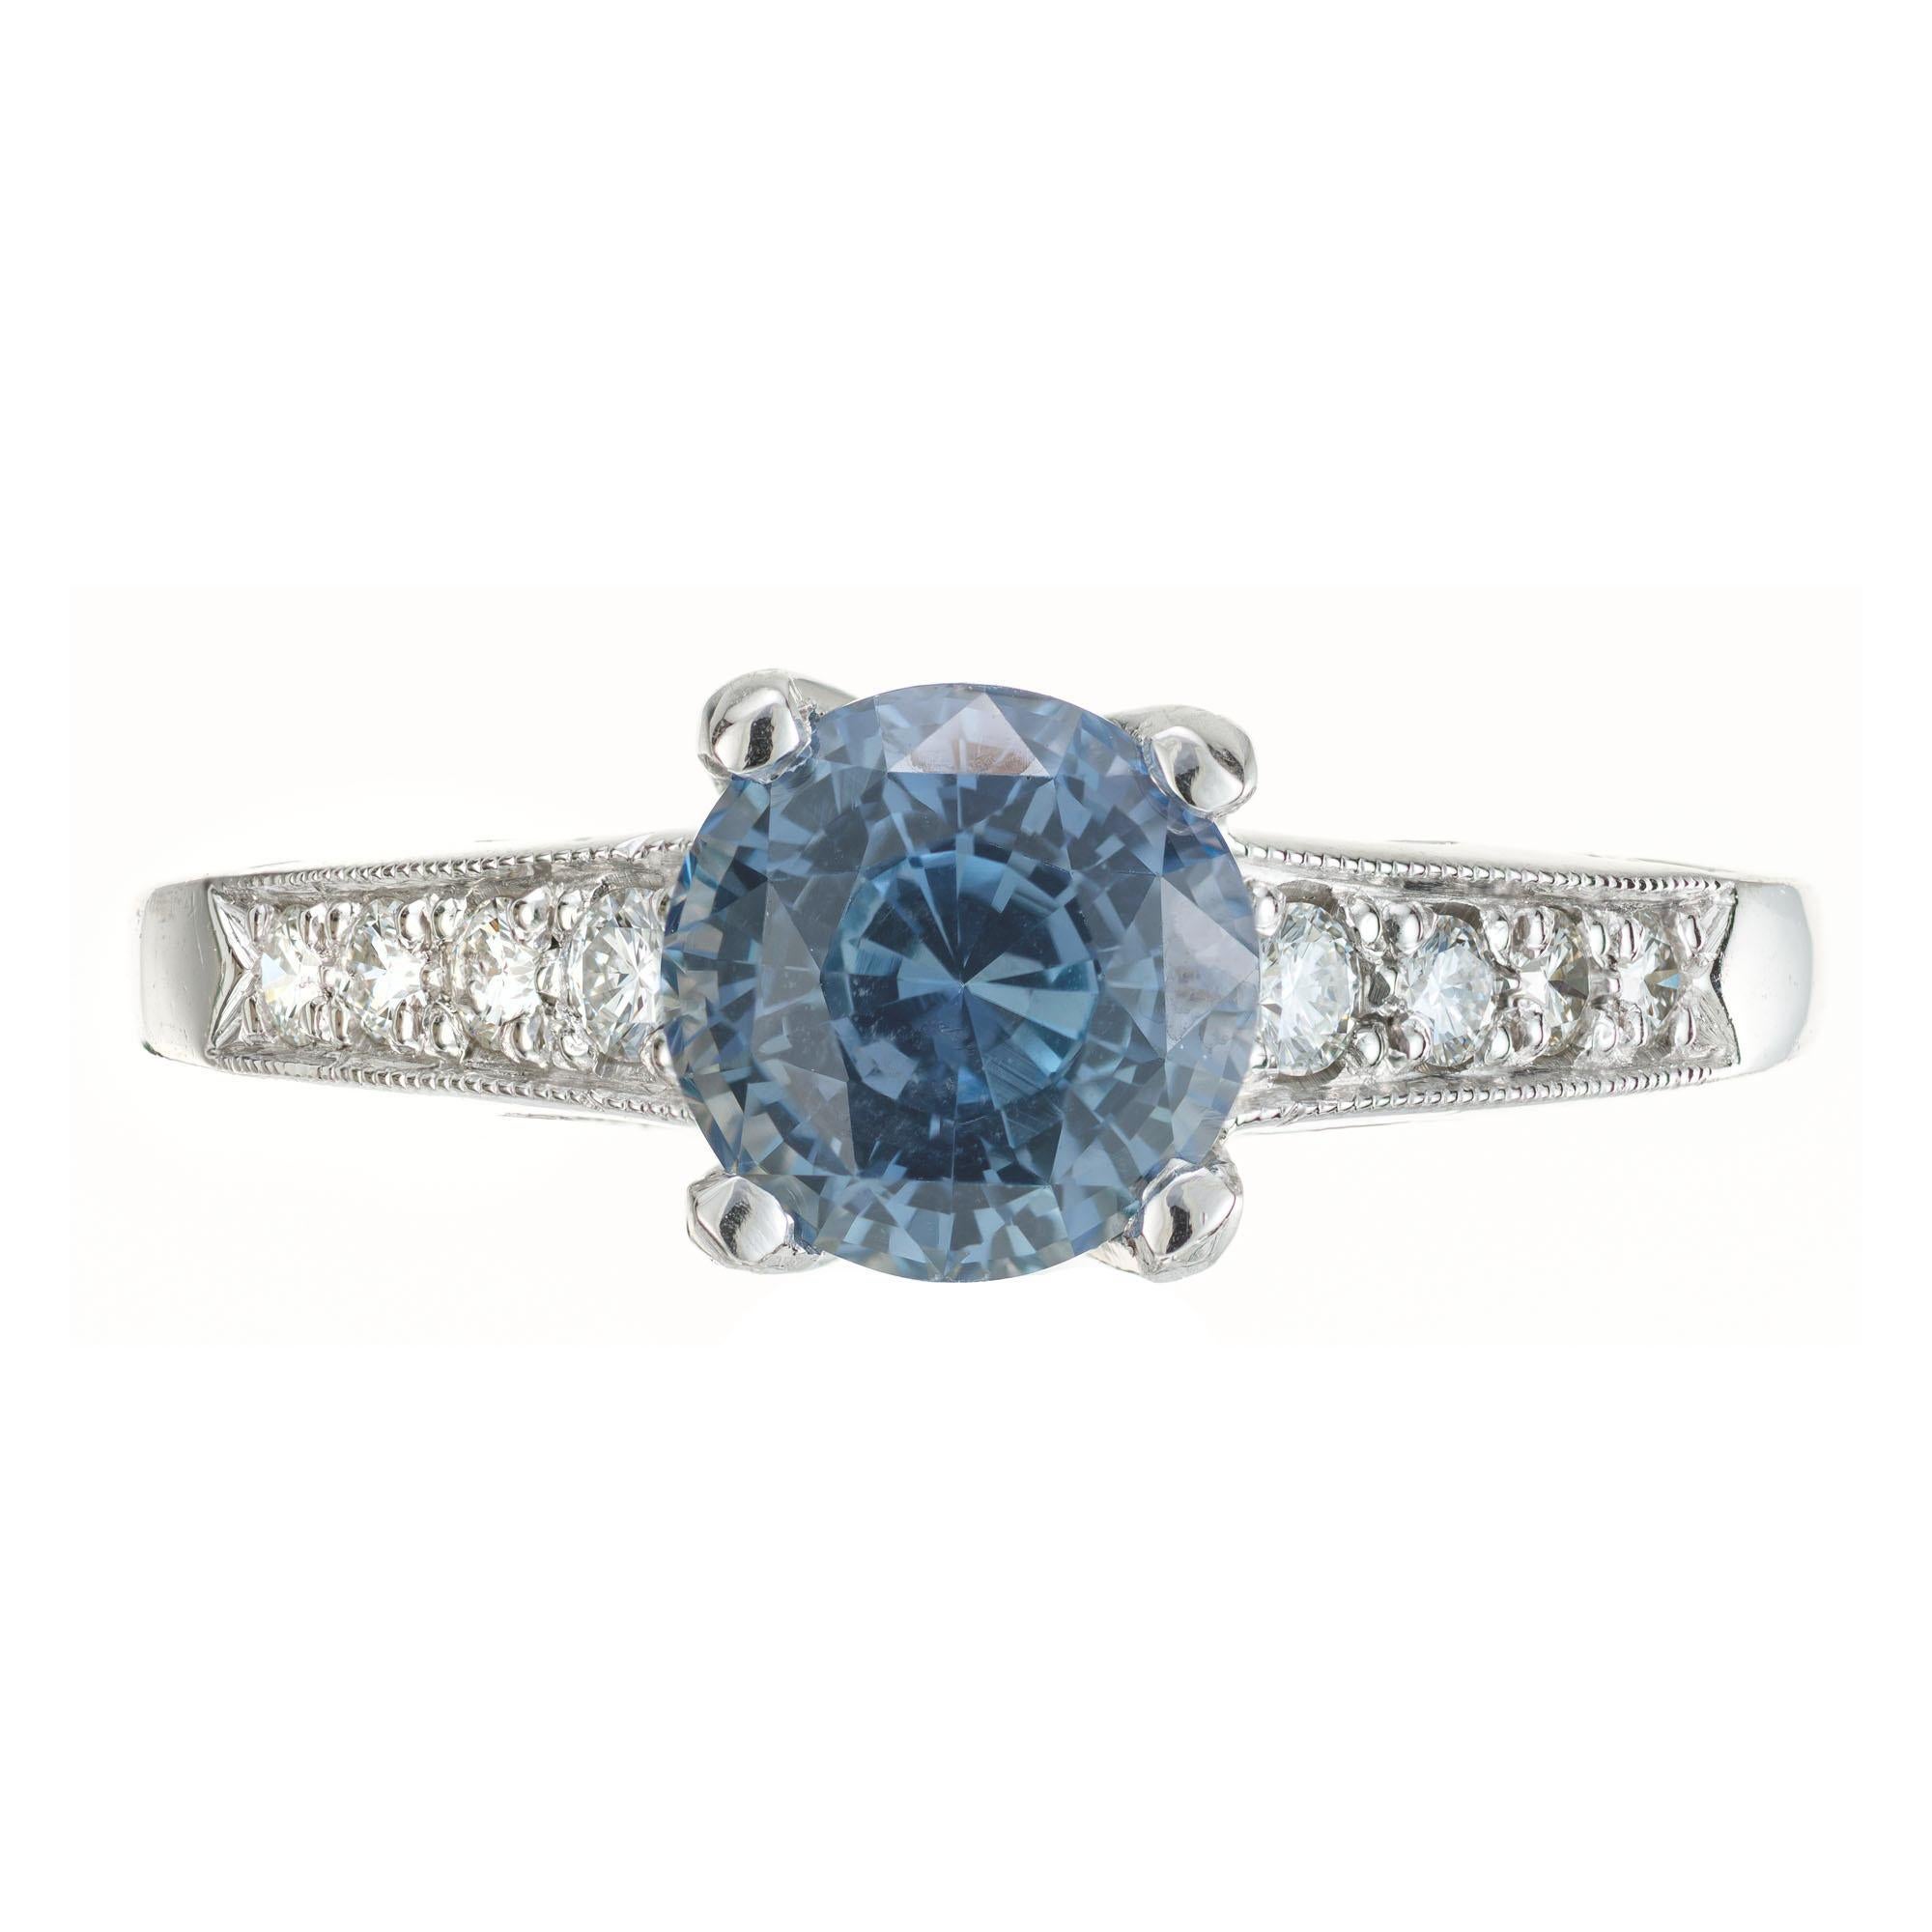 Authentic signed Krementz sapphire and diamond engagement ring. GIA certified center blue sapphire set in a platinum setting with 40 round brilliant cut pave accent diamonds. Curved prong sides and graduated pave set sides. Signed RKG1866

1 round